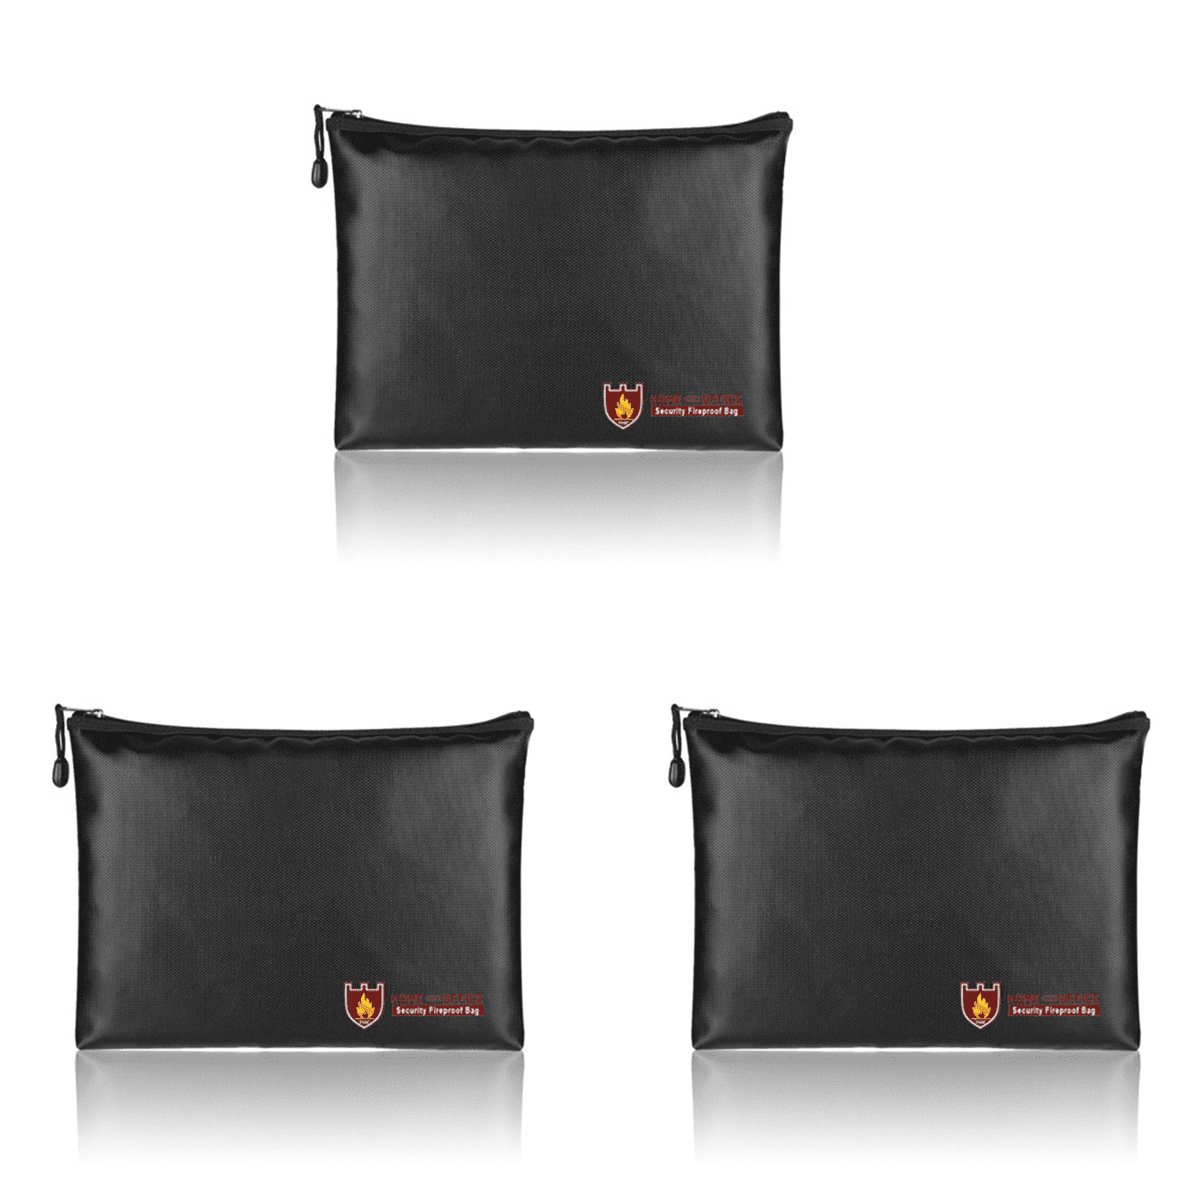 3X Fireproof Document Bag,Waterproof and Fireproof Document Bags ...